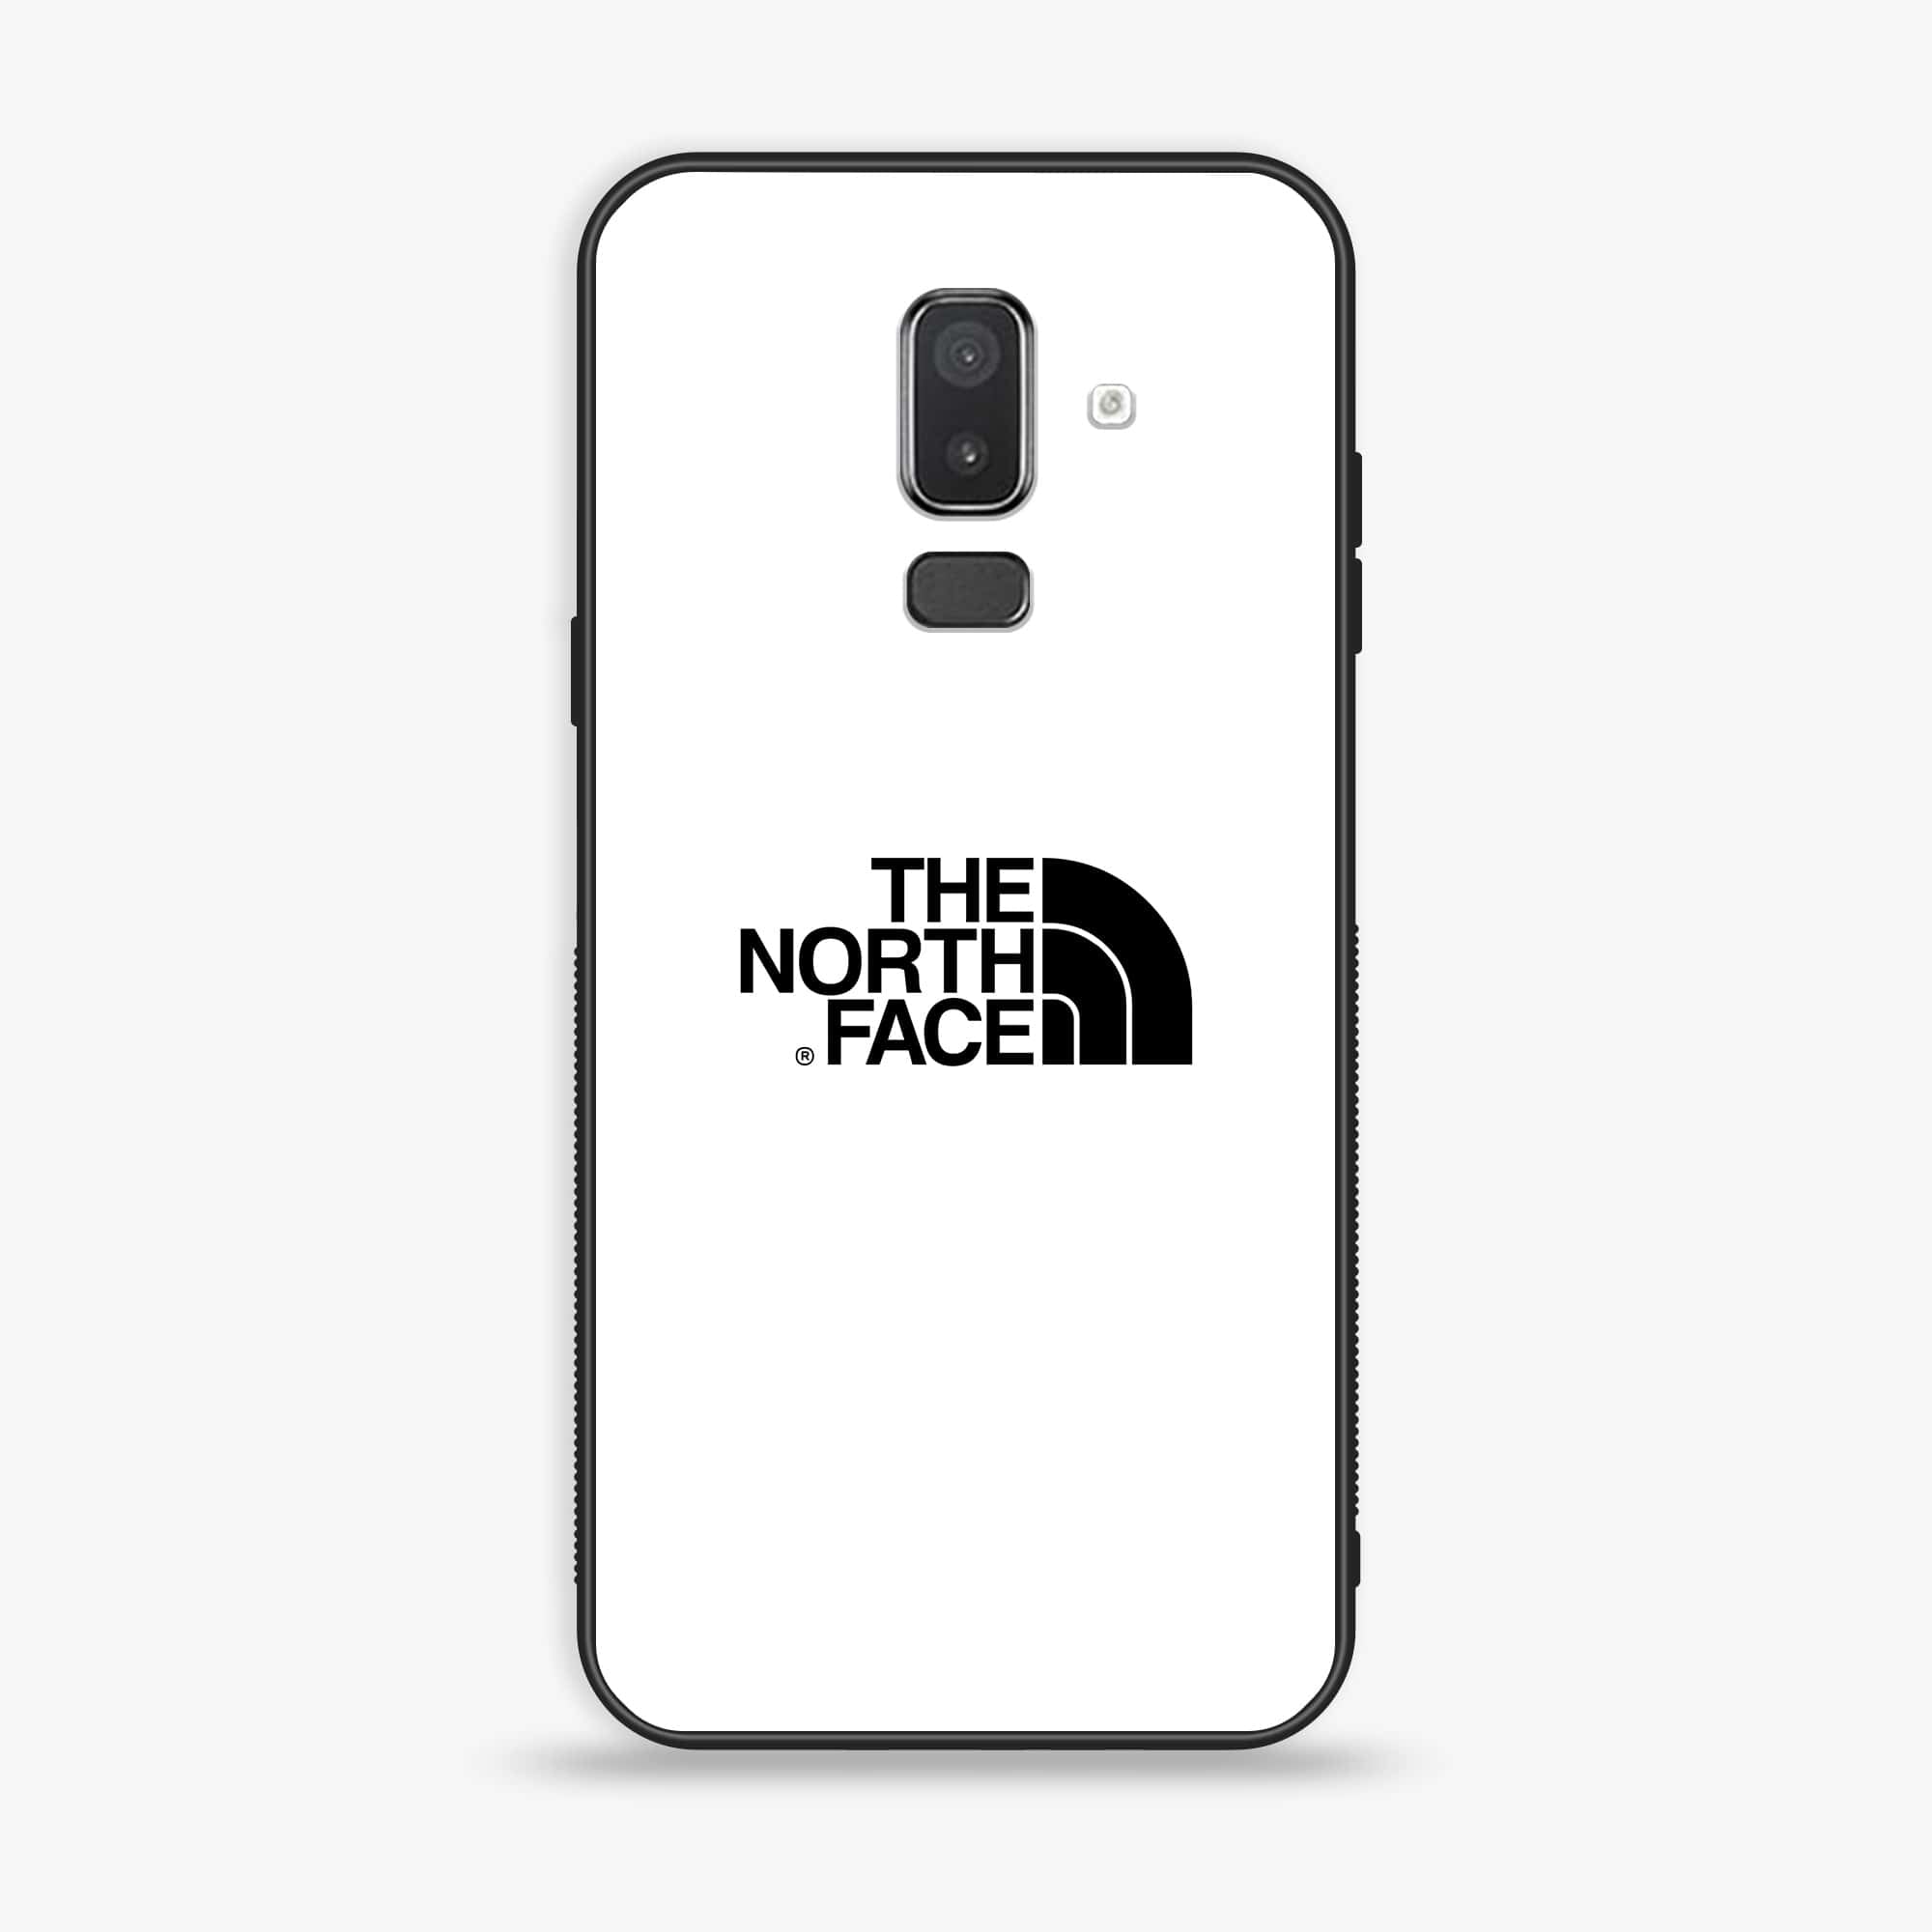 Samsung Galaxy J8 2018 - The North Face Series - Premium Printed Glass soft Bumper shock Proof Case